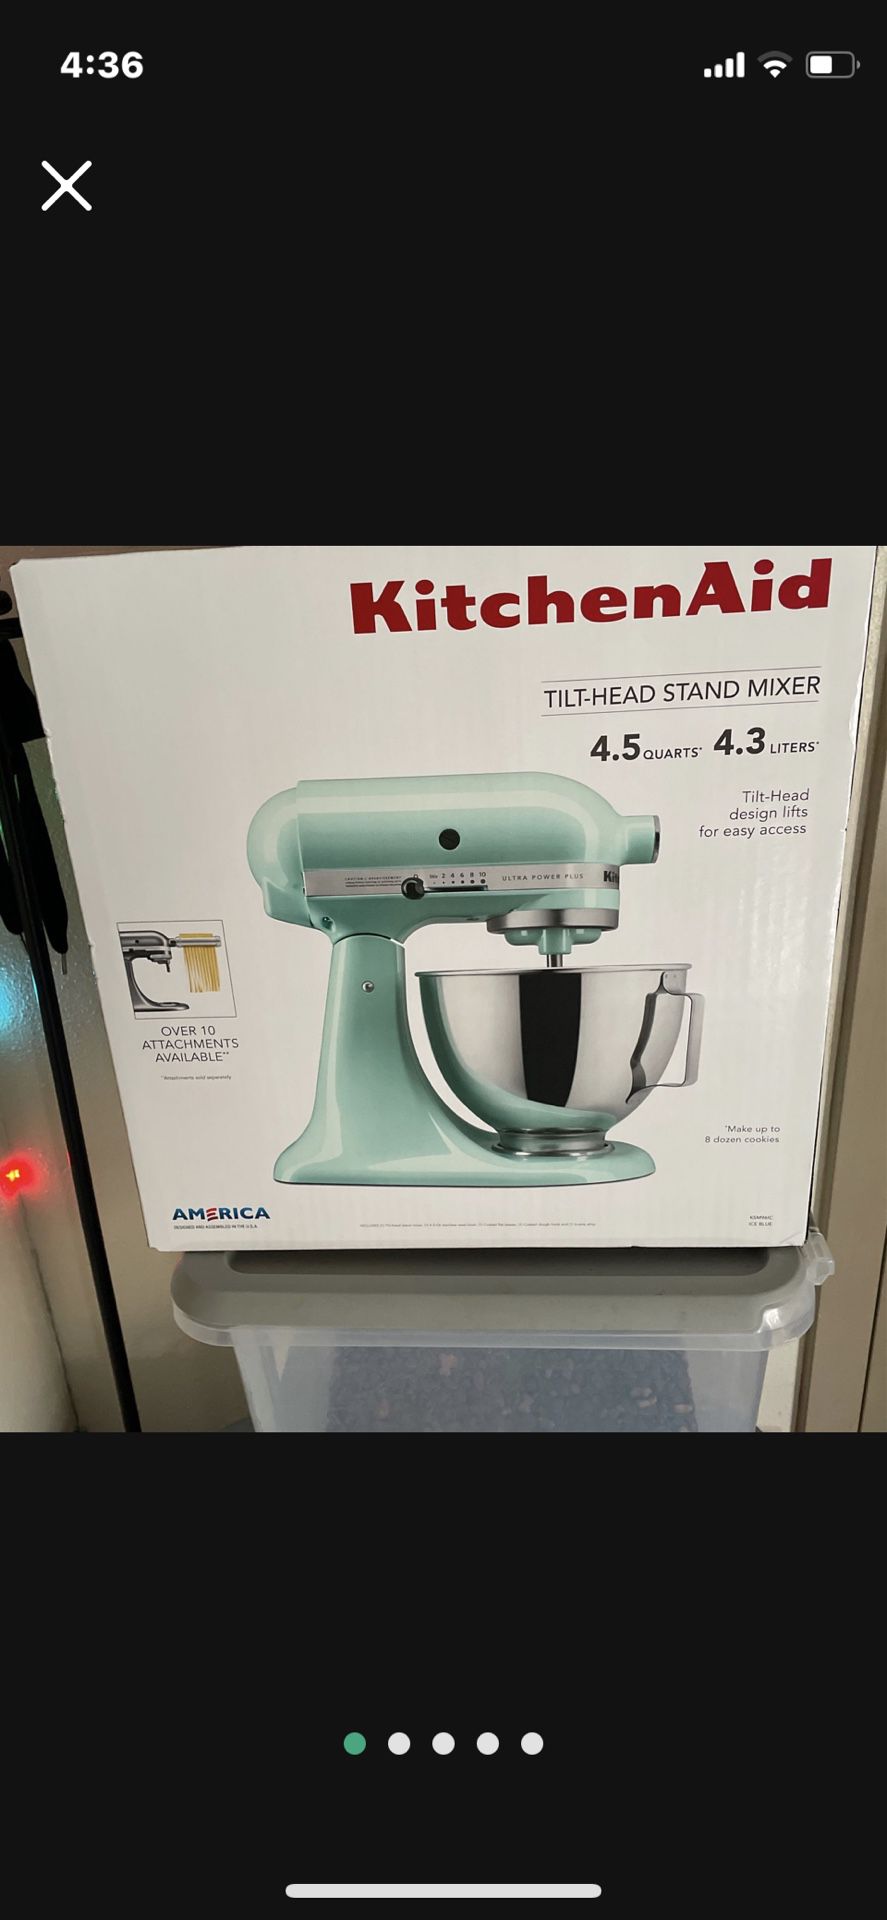 LIMITED EDITION ICE BLUE KitchenAid Stand mixer 